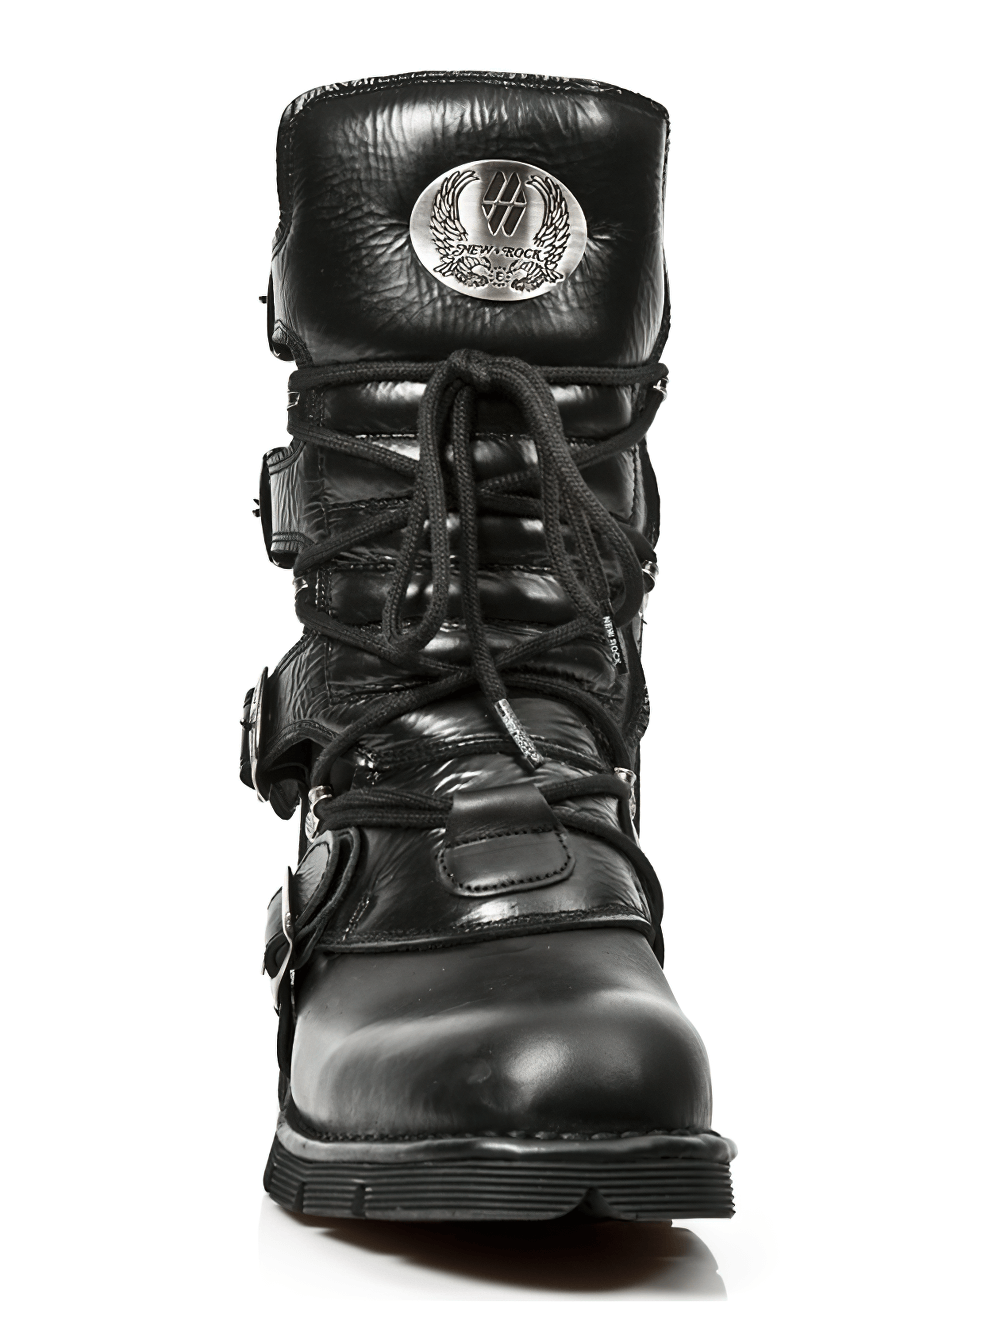 NEW ROCK Black Buckle and Lace-up Mid-Calf Boots